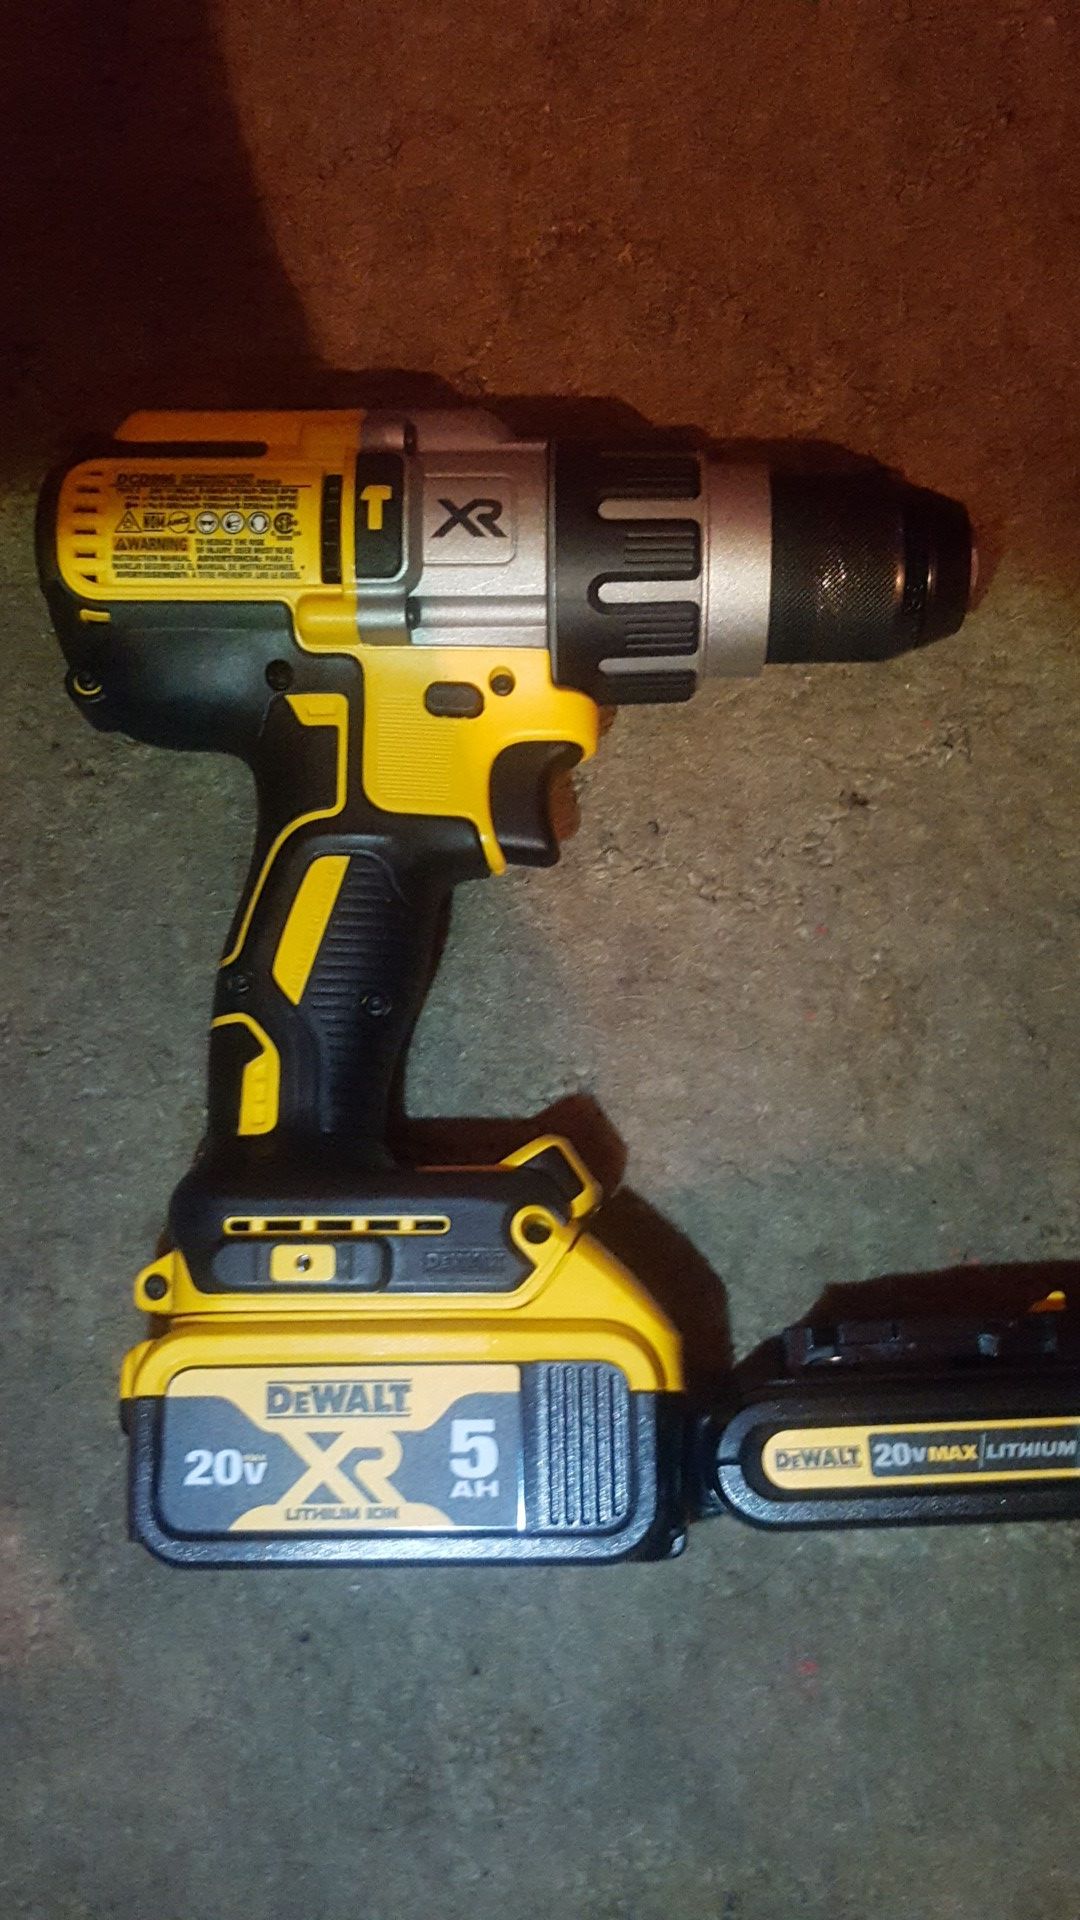 Dewalt xr hammer drill with battery 5.0 and 1.5 amp battery